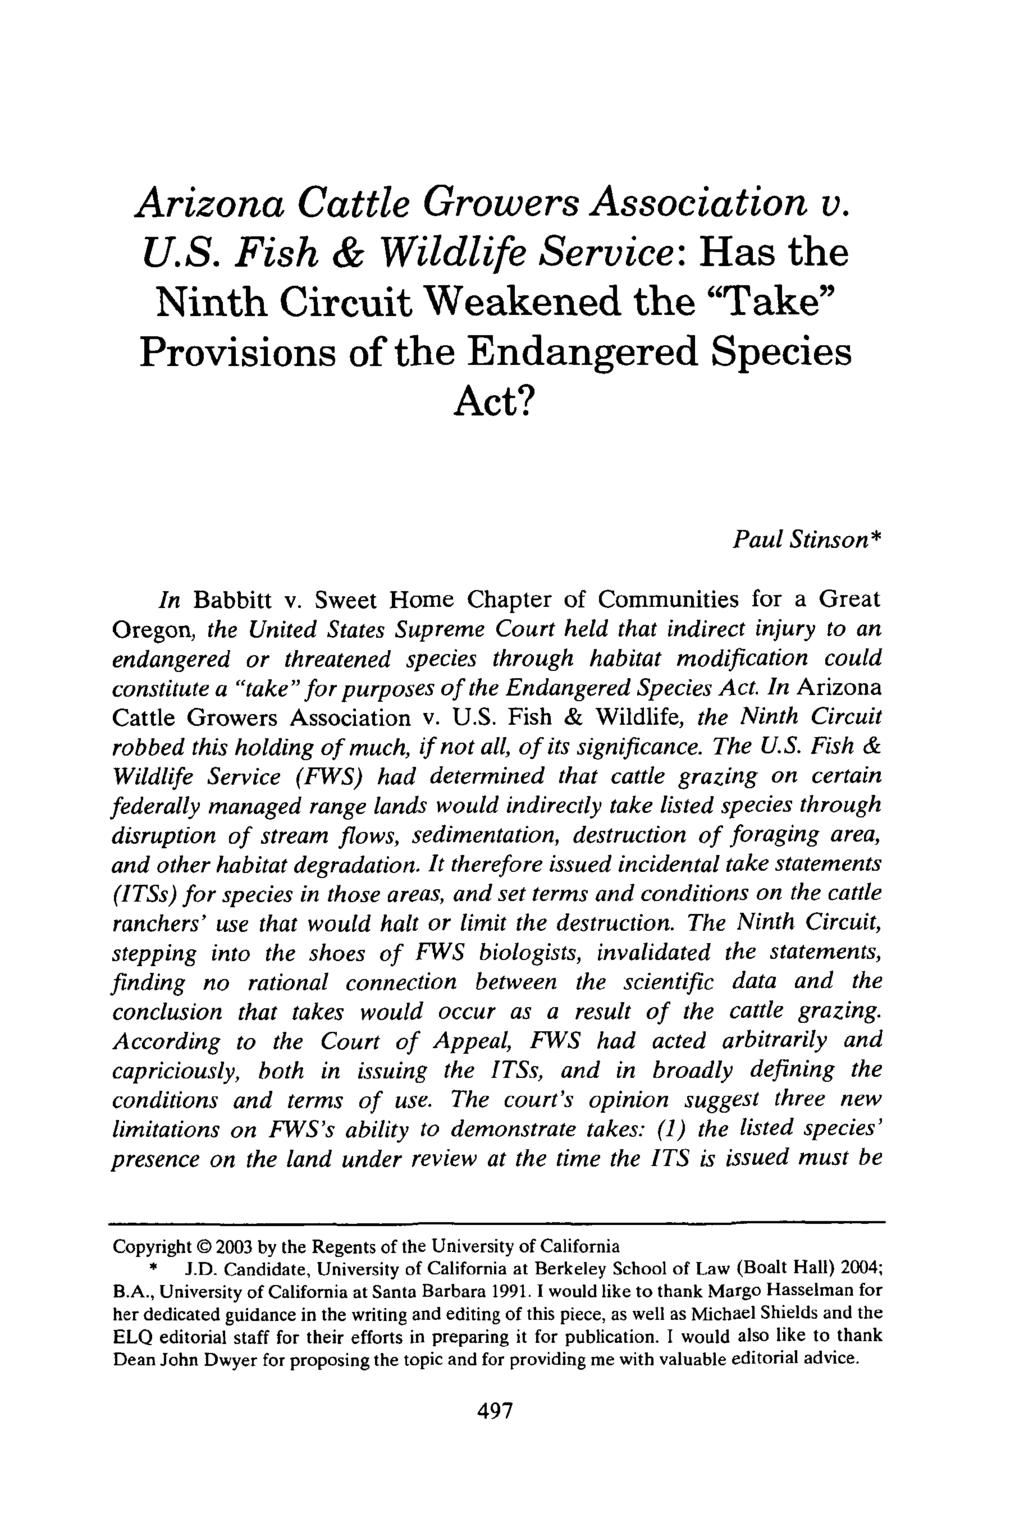 Arizona Cattle Growers Association v. U.S. Fish & Wildlife Service: Has the Ninth Circuit Weakened the "Take" Provisions of the Endangered Species Act? Paul Stinson* In Babbitt v.